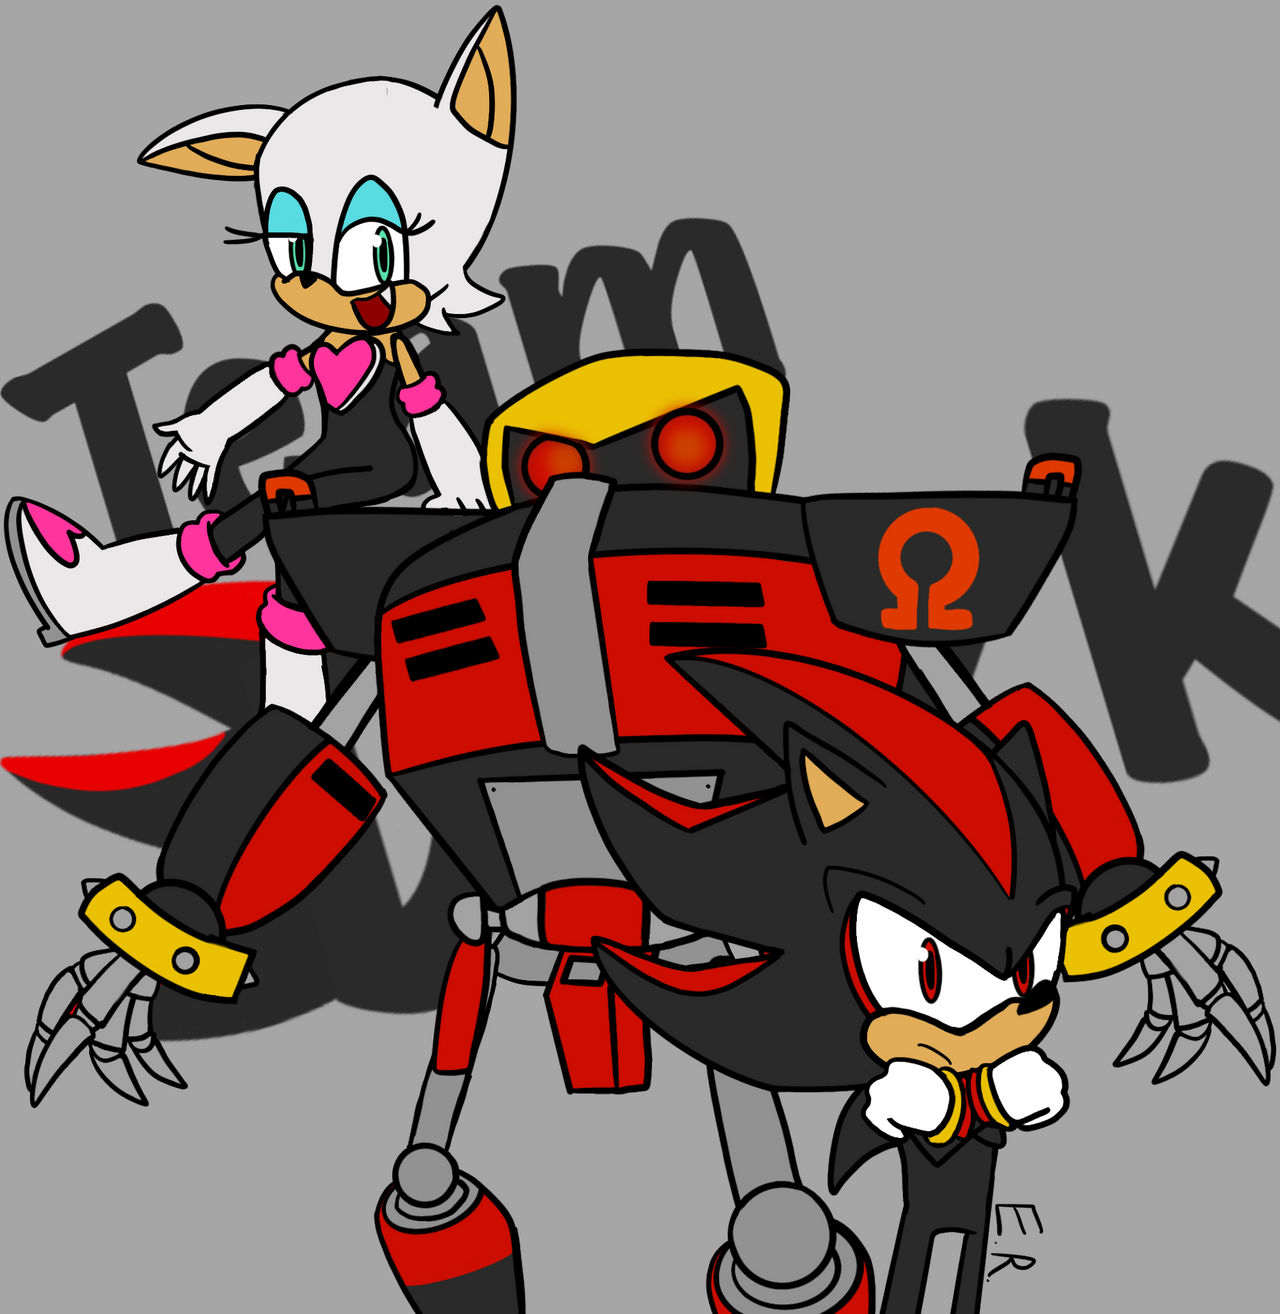 Sonic and friends or Team Dark by symbiote12345 on DeviantArt